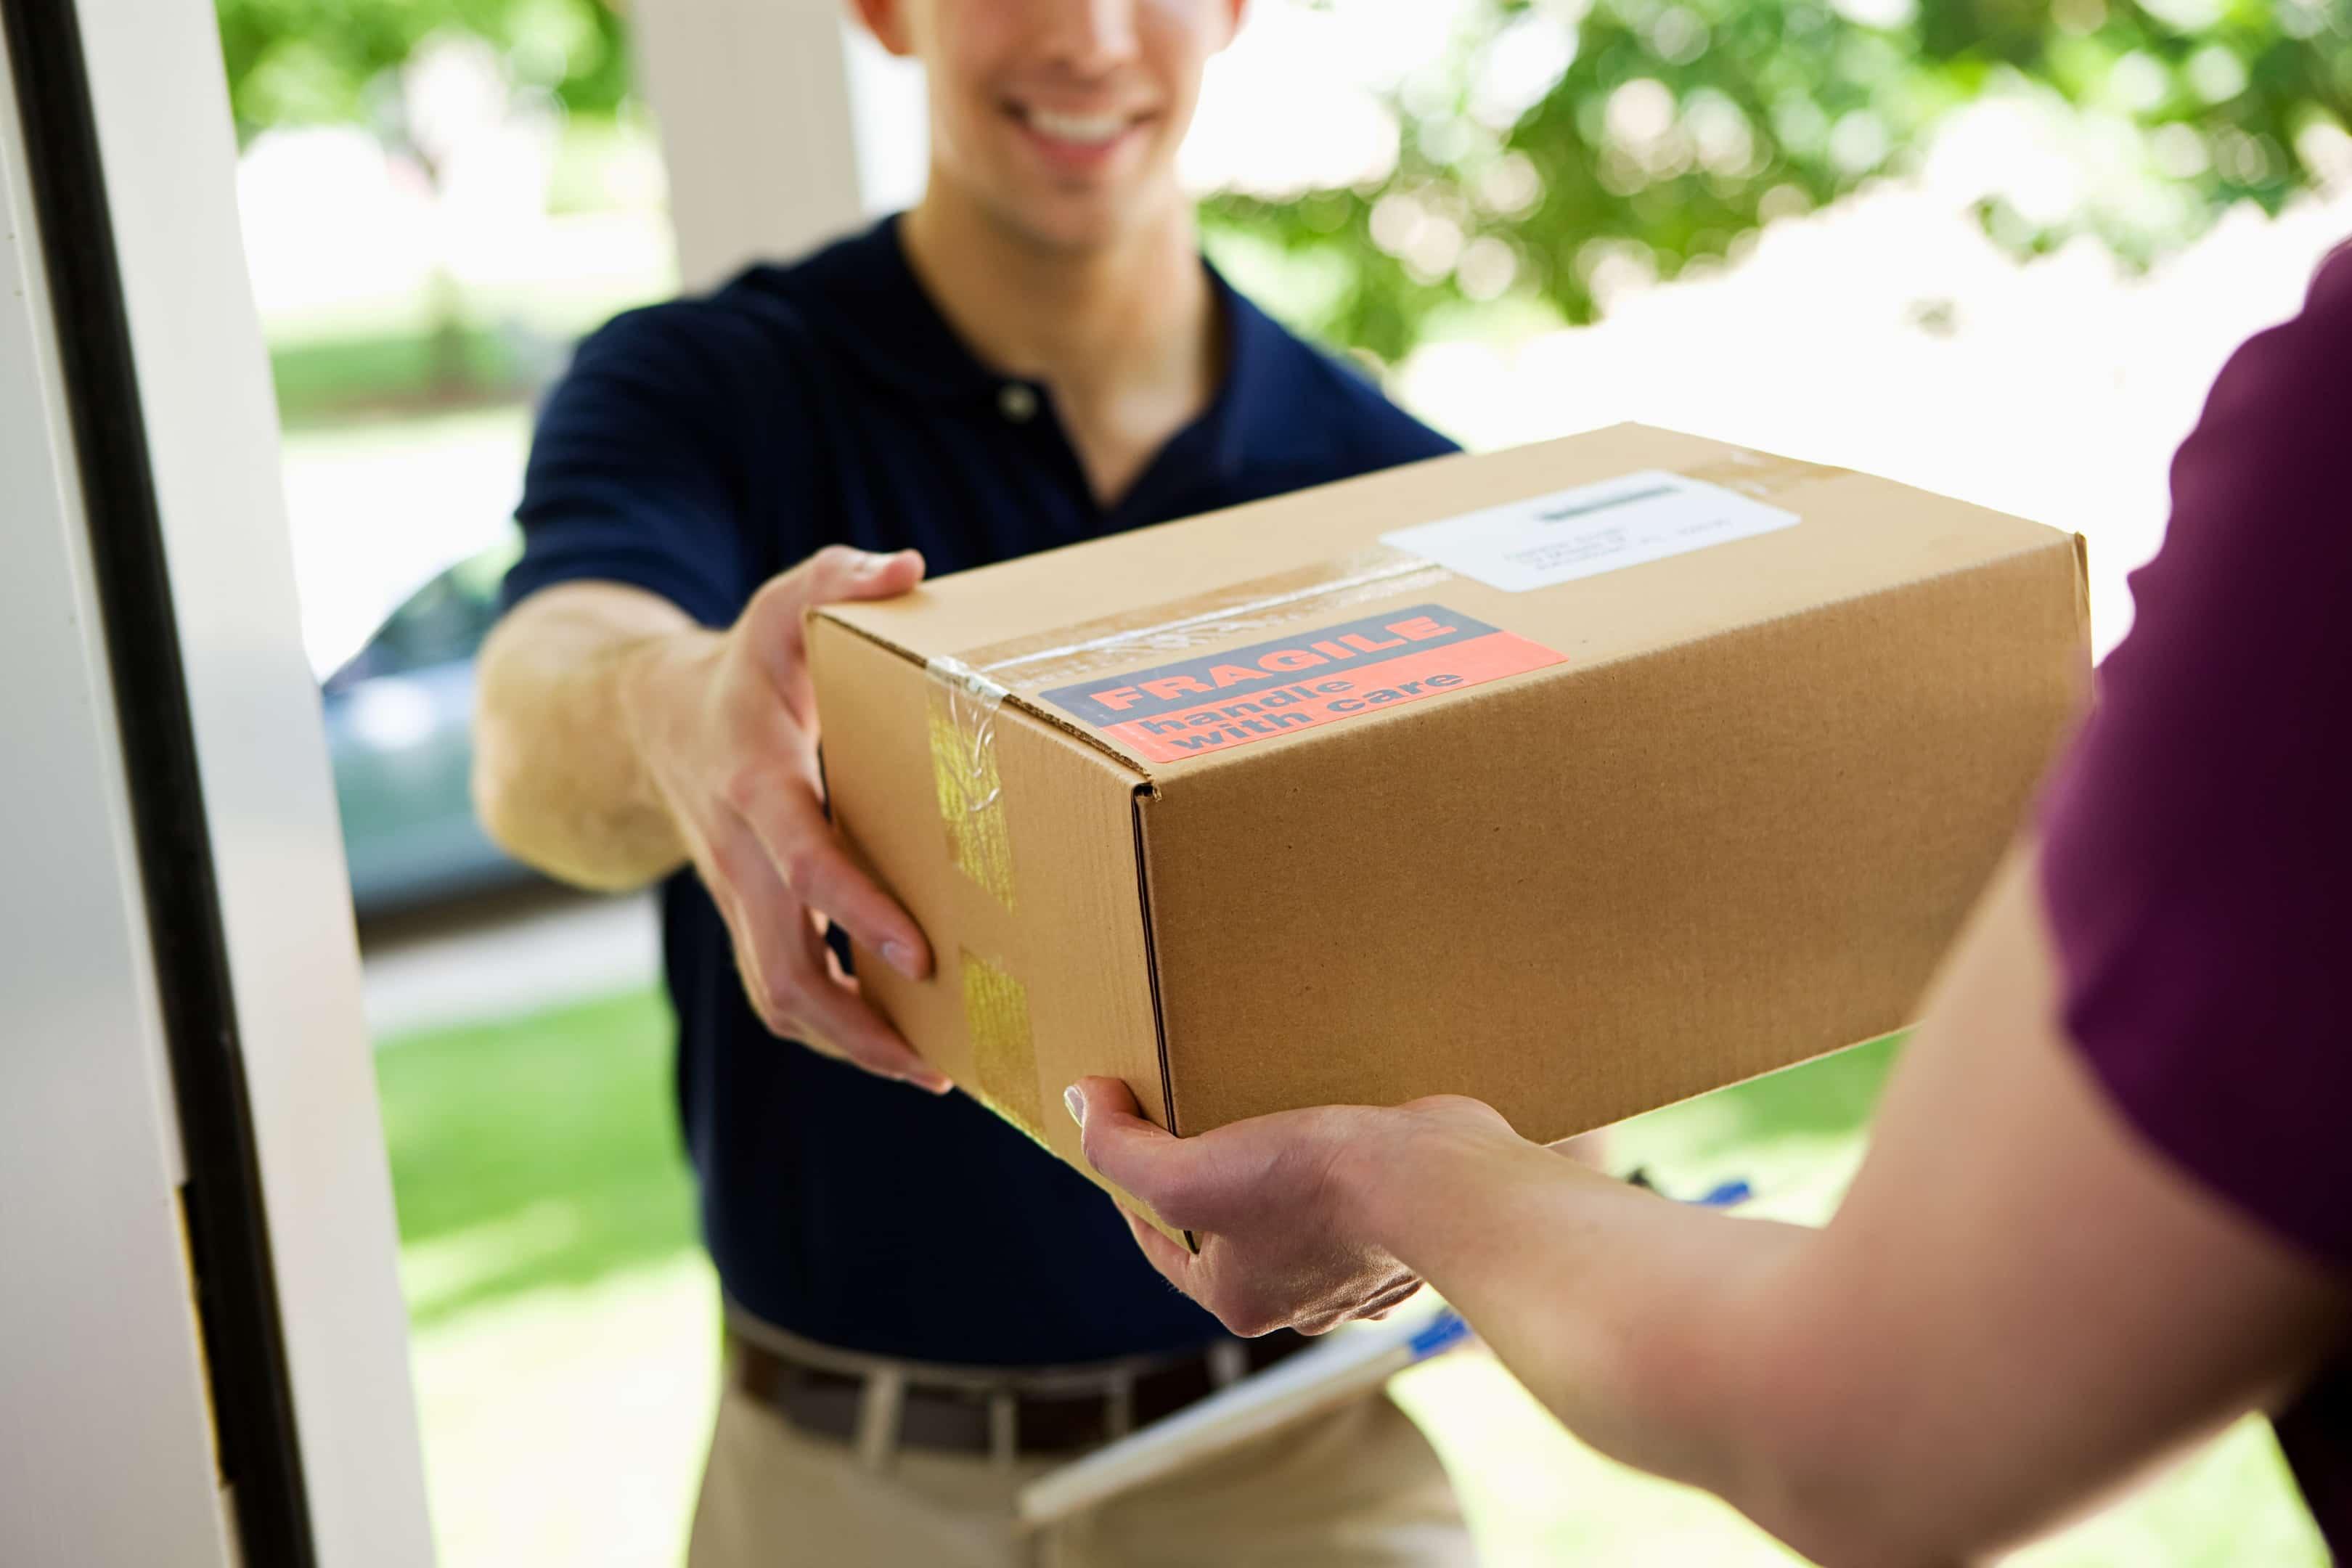 Product Same Day Courier Services - Courier - Anytime Express Couriers | Dewsbury Delivery & Courier Service image